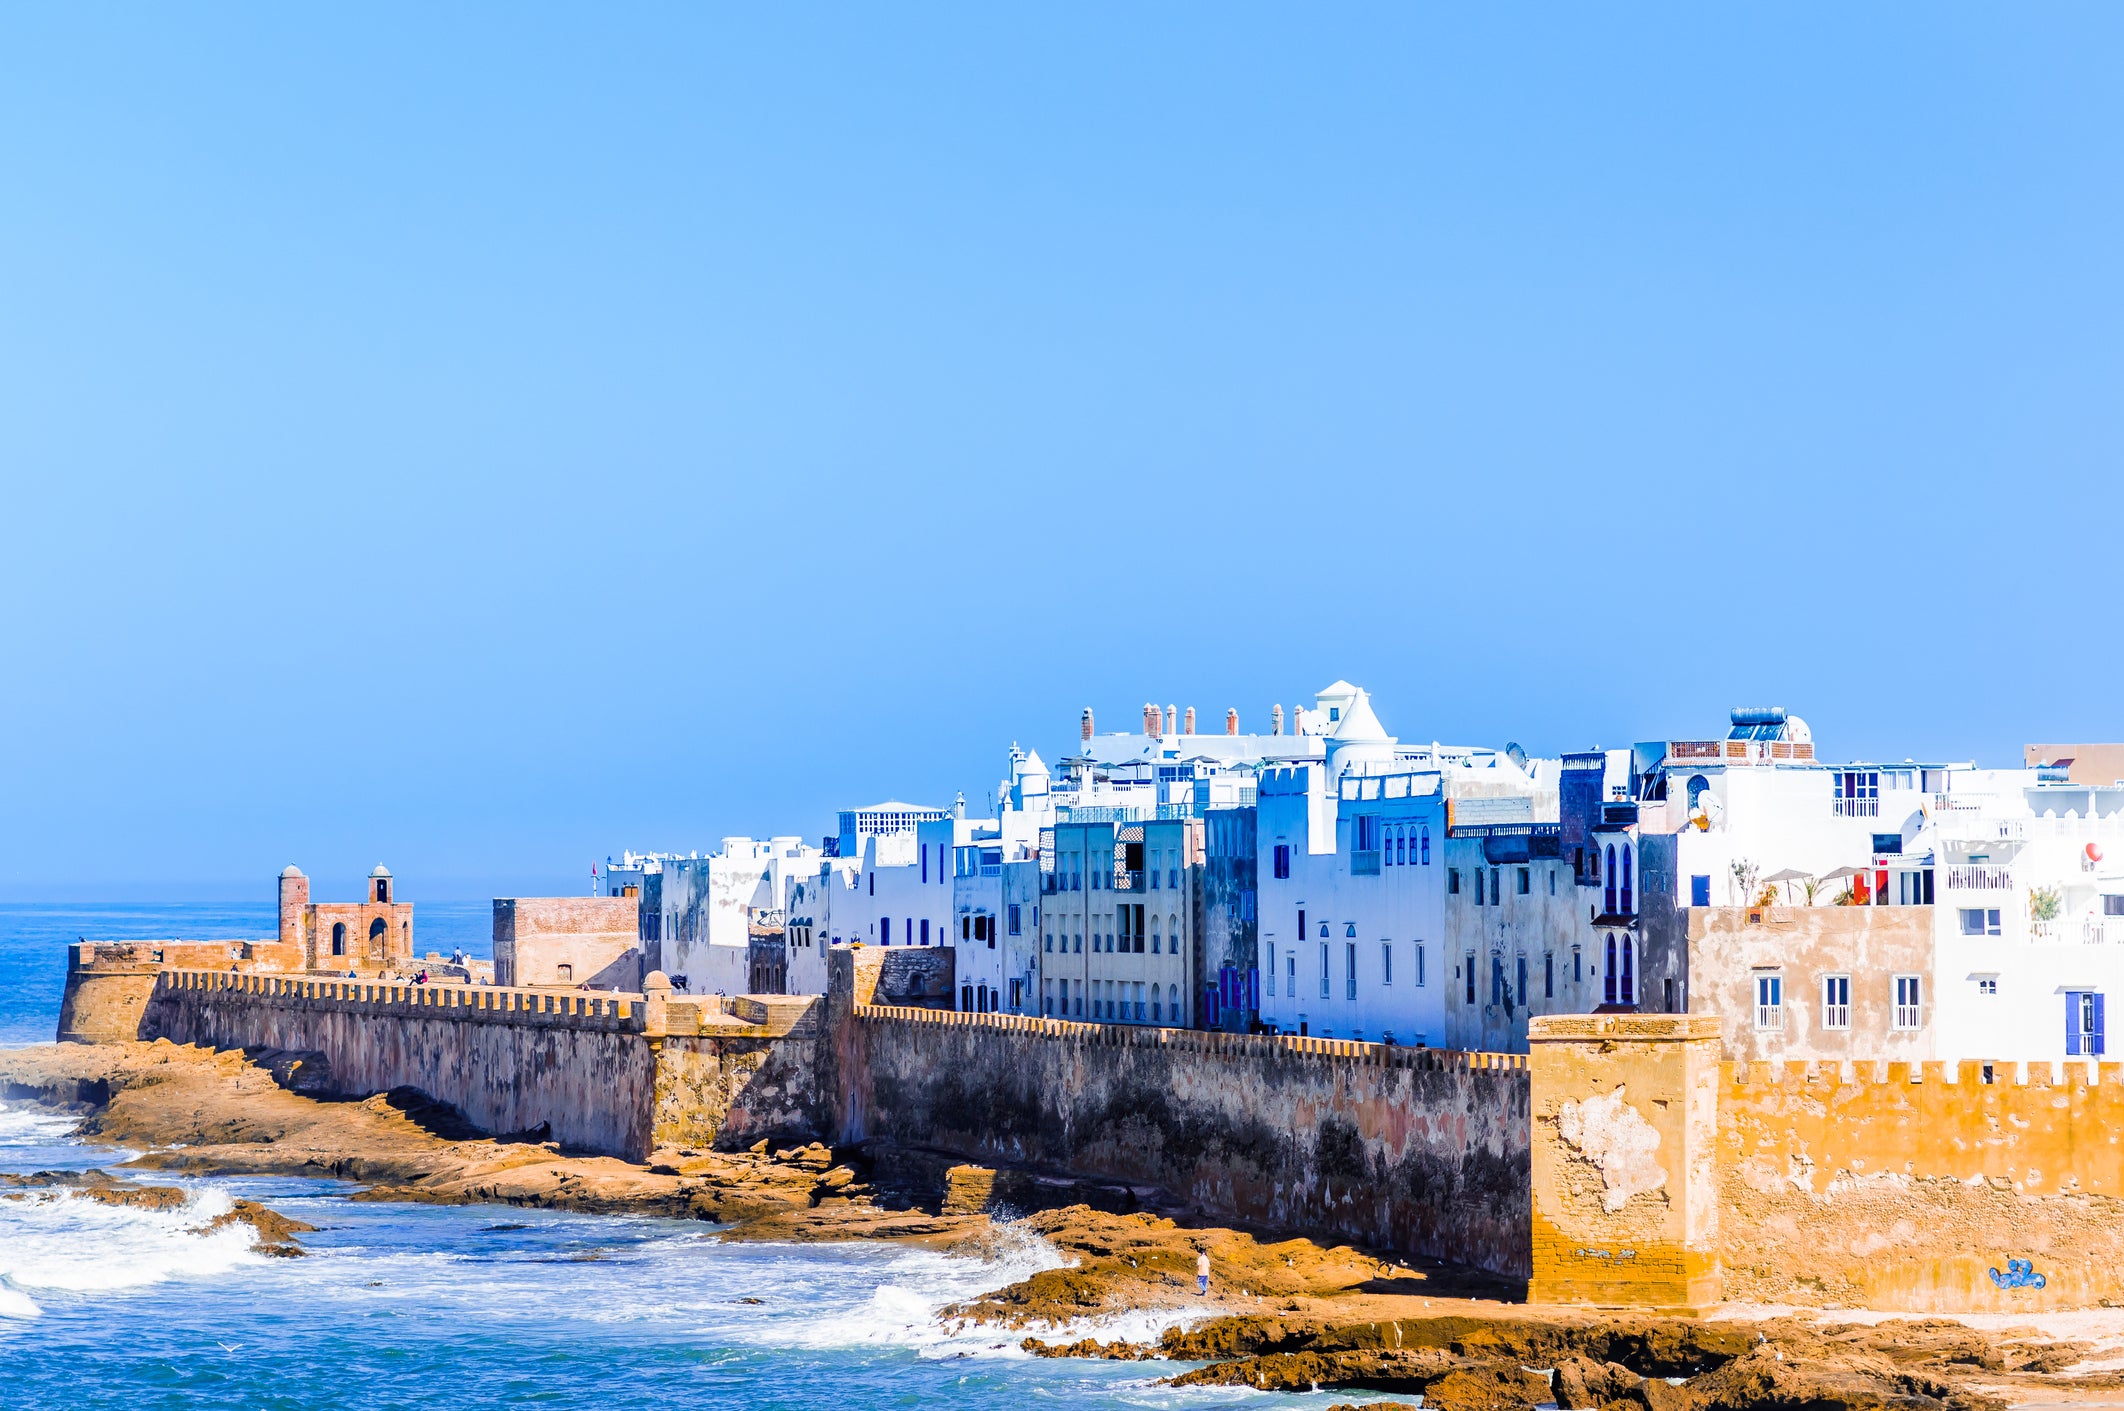 France meets Morocco in the port city of Essaouira